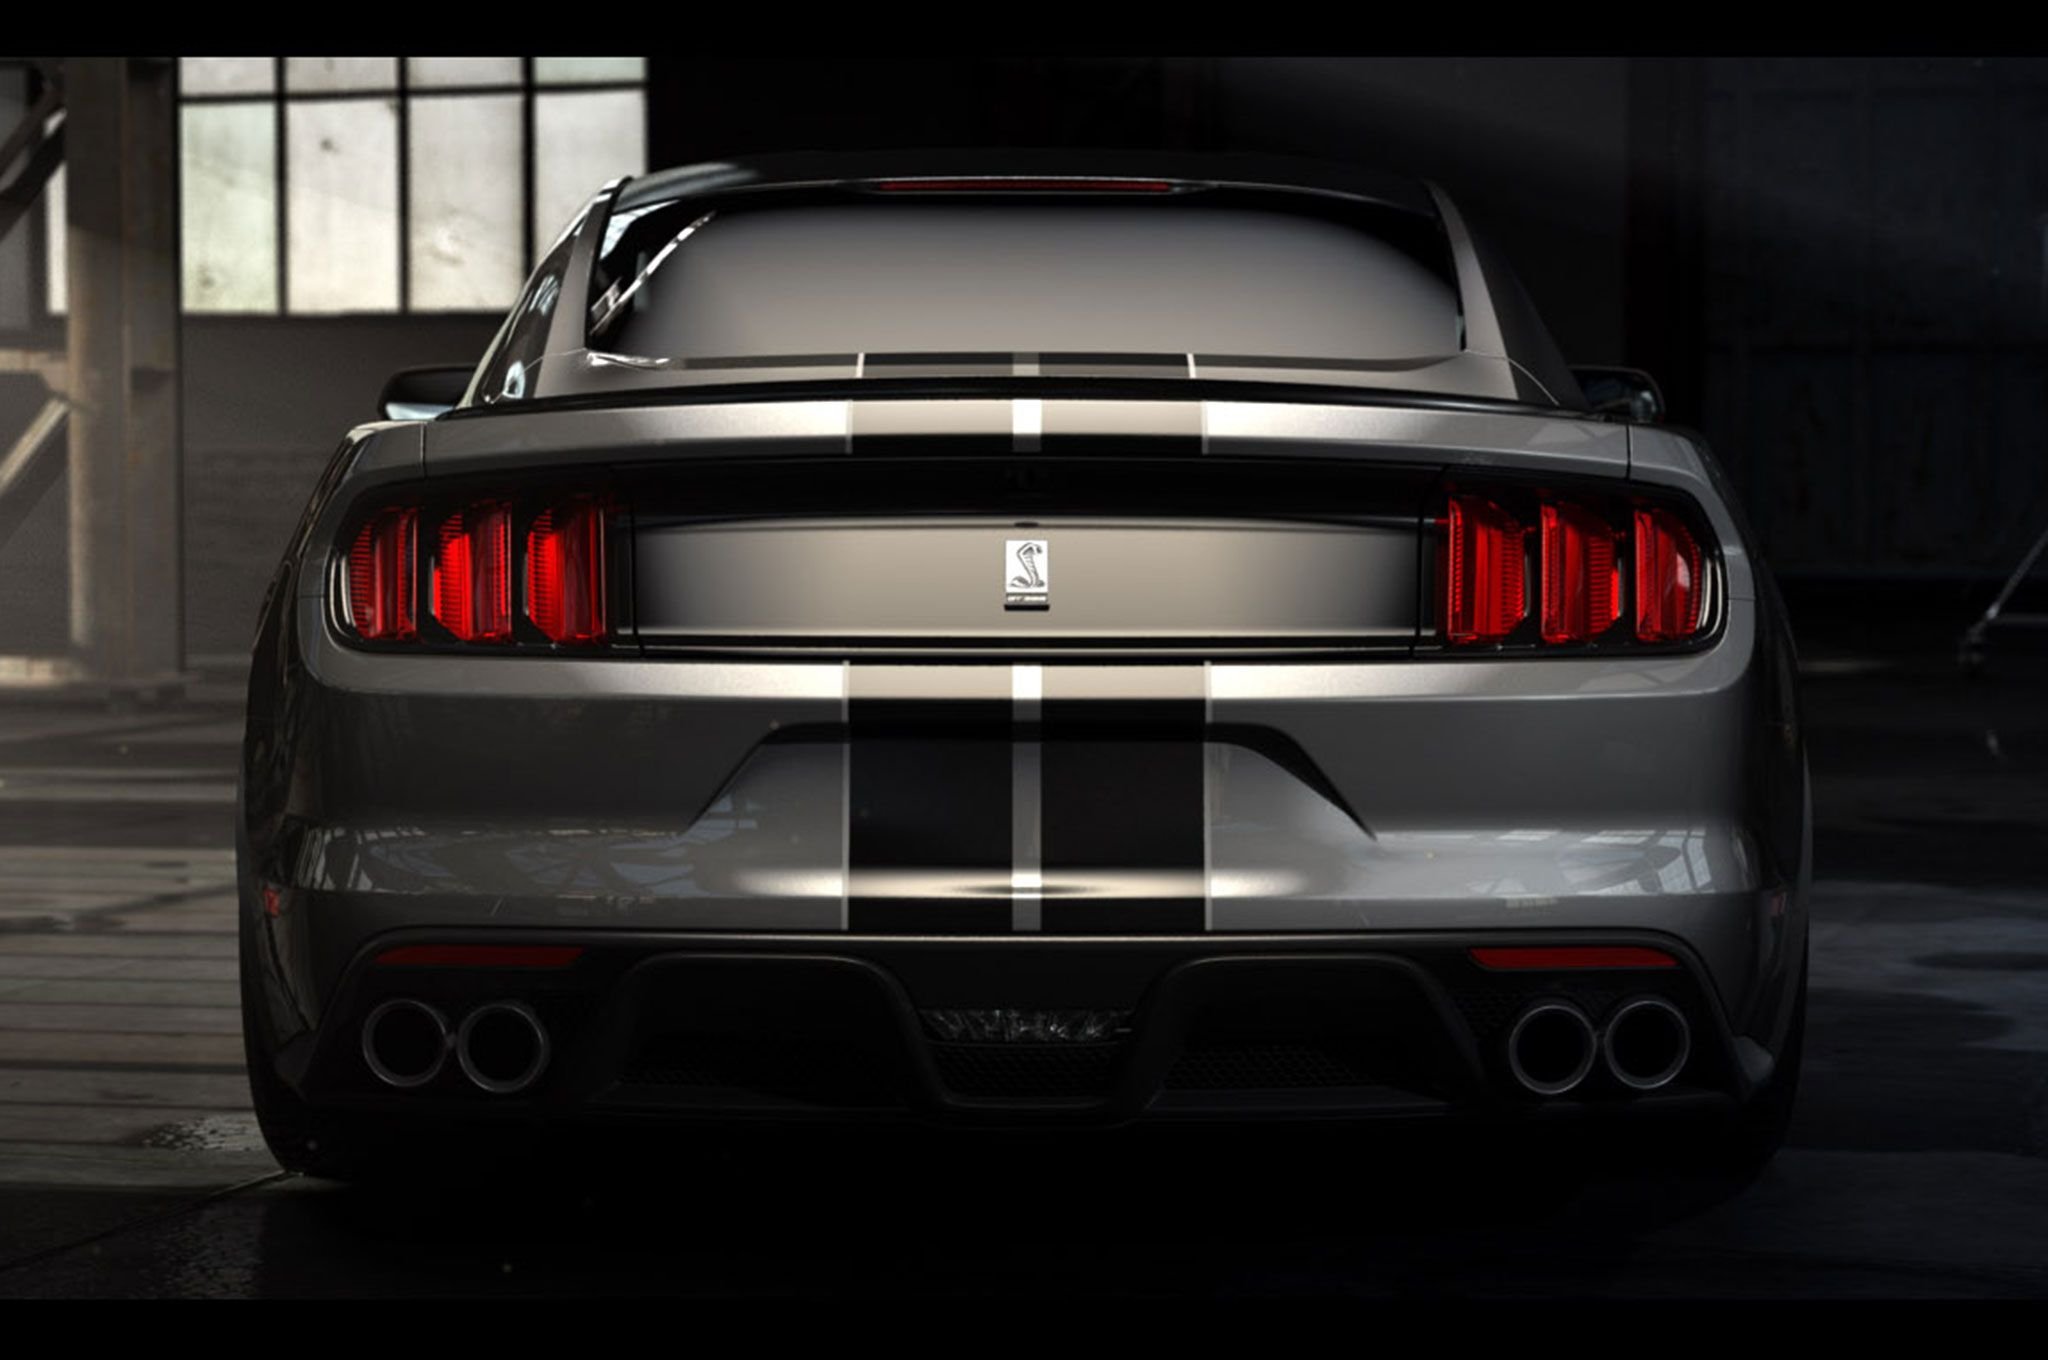 2015, Ford, Mustang, Shelby, Cobra, Gt, 350, Muscle, Supercar, Usa, 2048x1360 04 Wallpaper